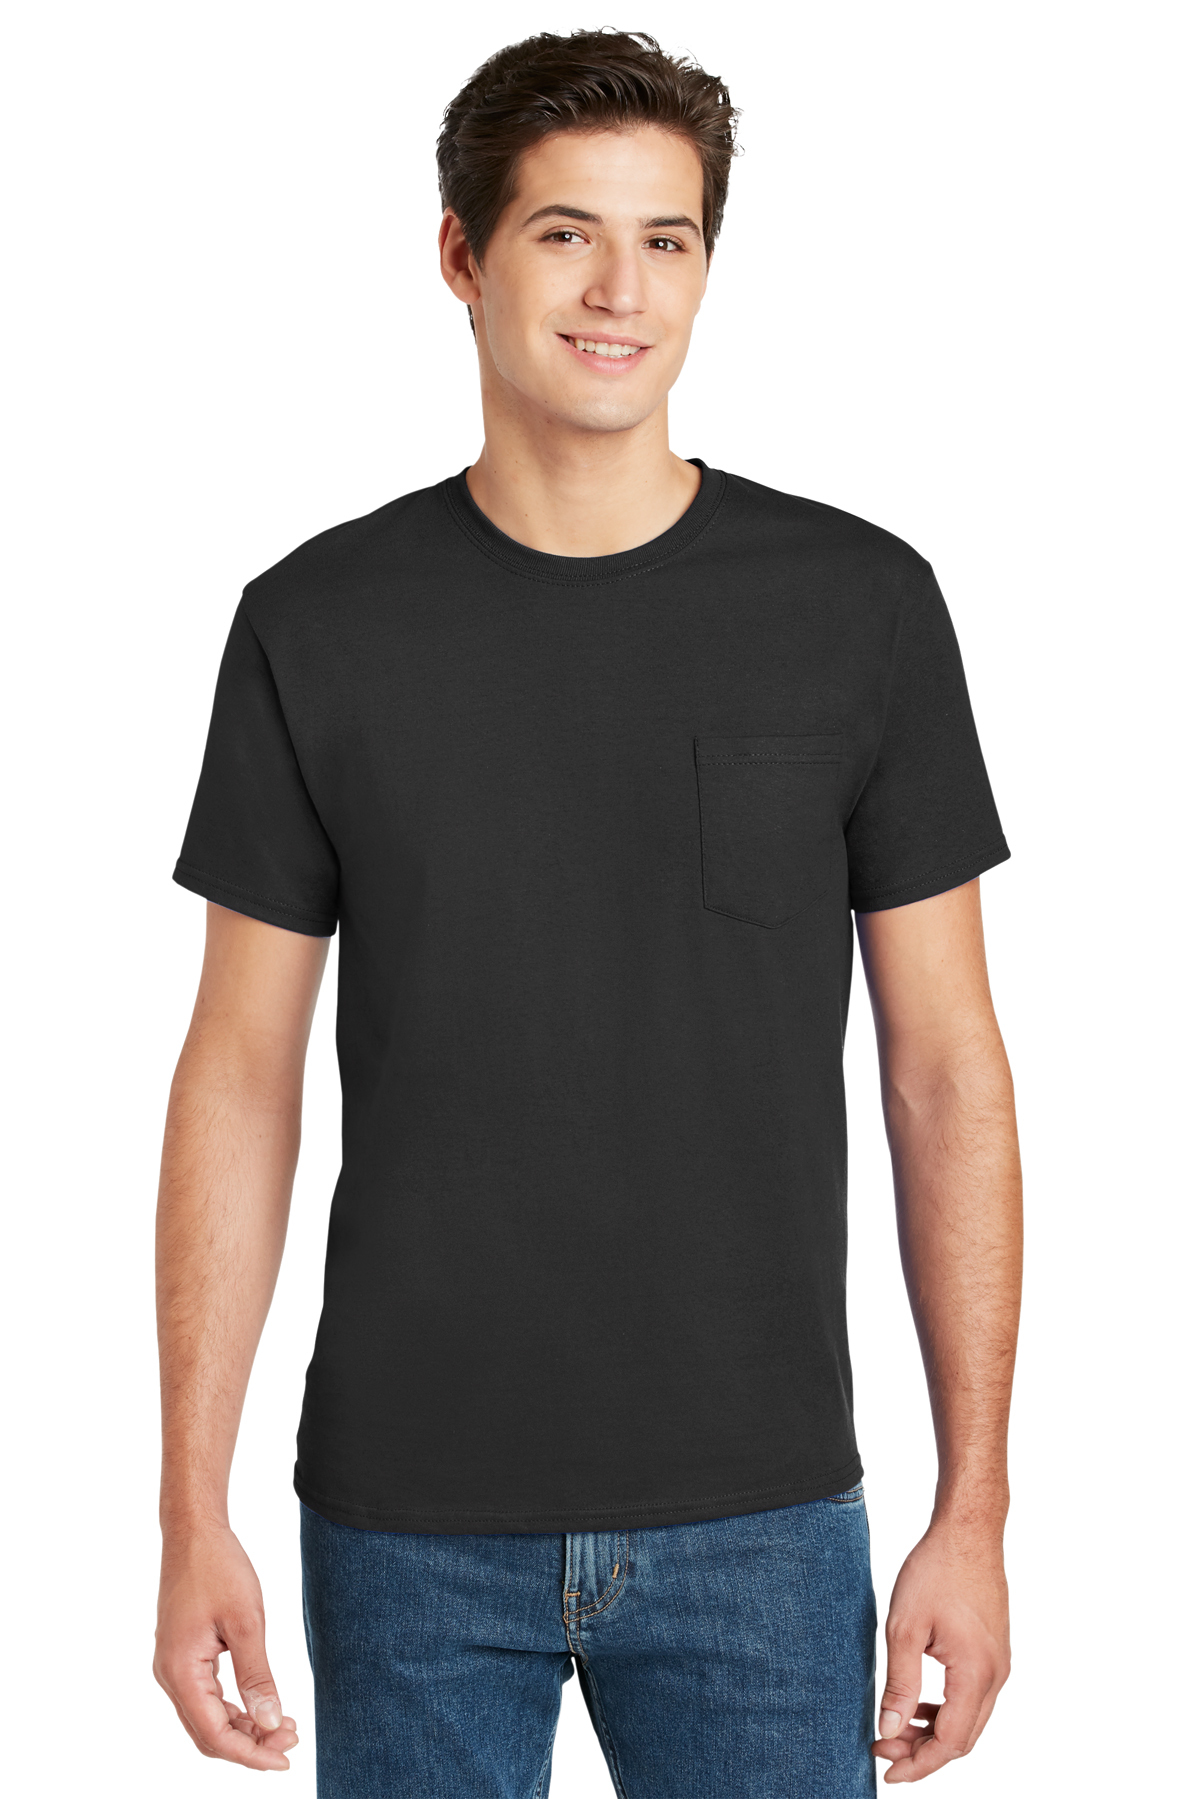 Hanes - Authentic 100% Cotton T-Shirt with Pocket, Product